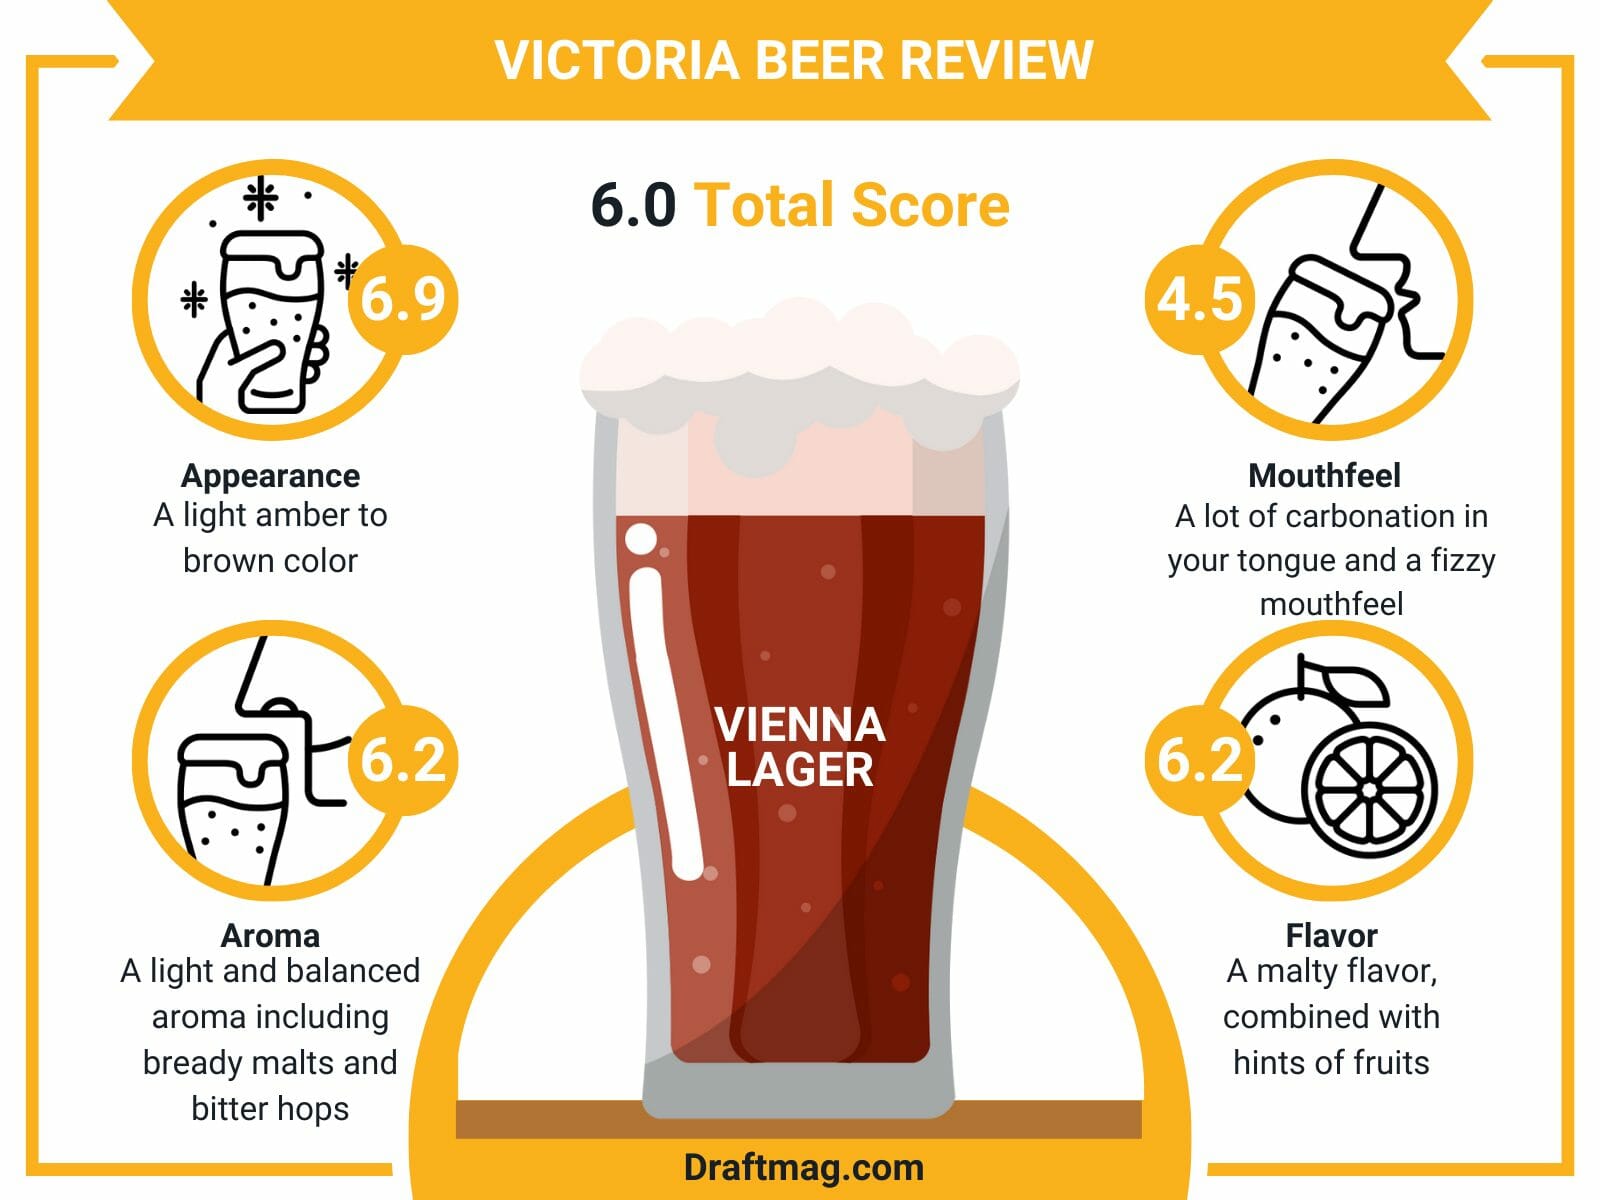 Victoria beer review infographic